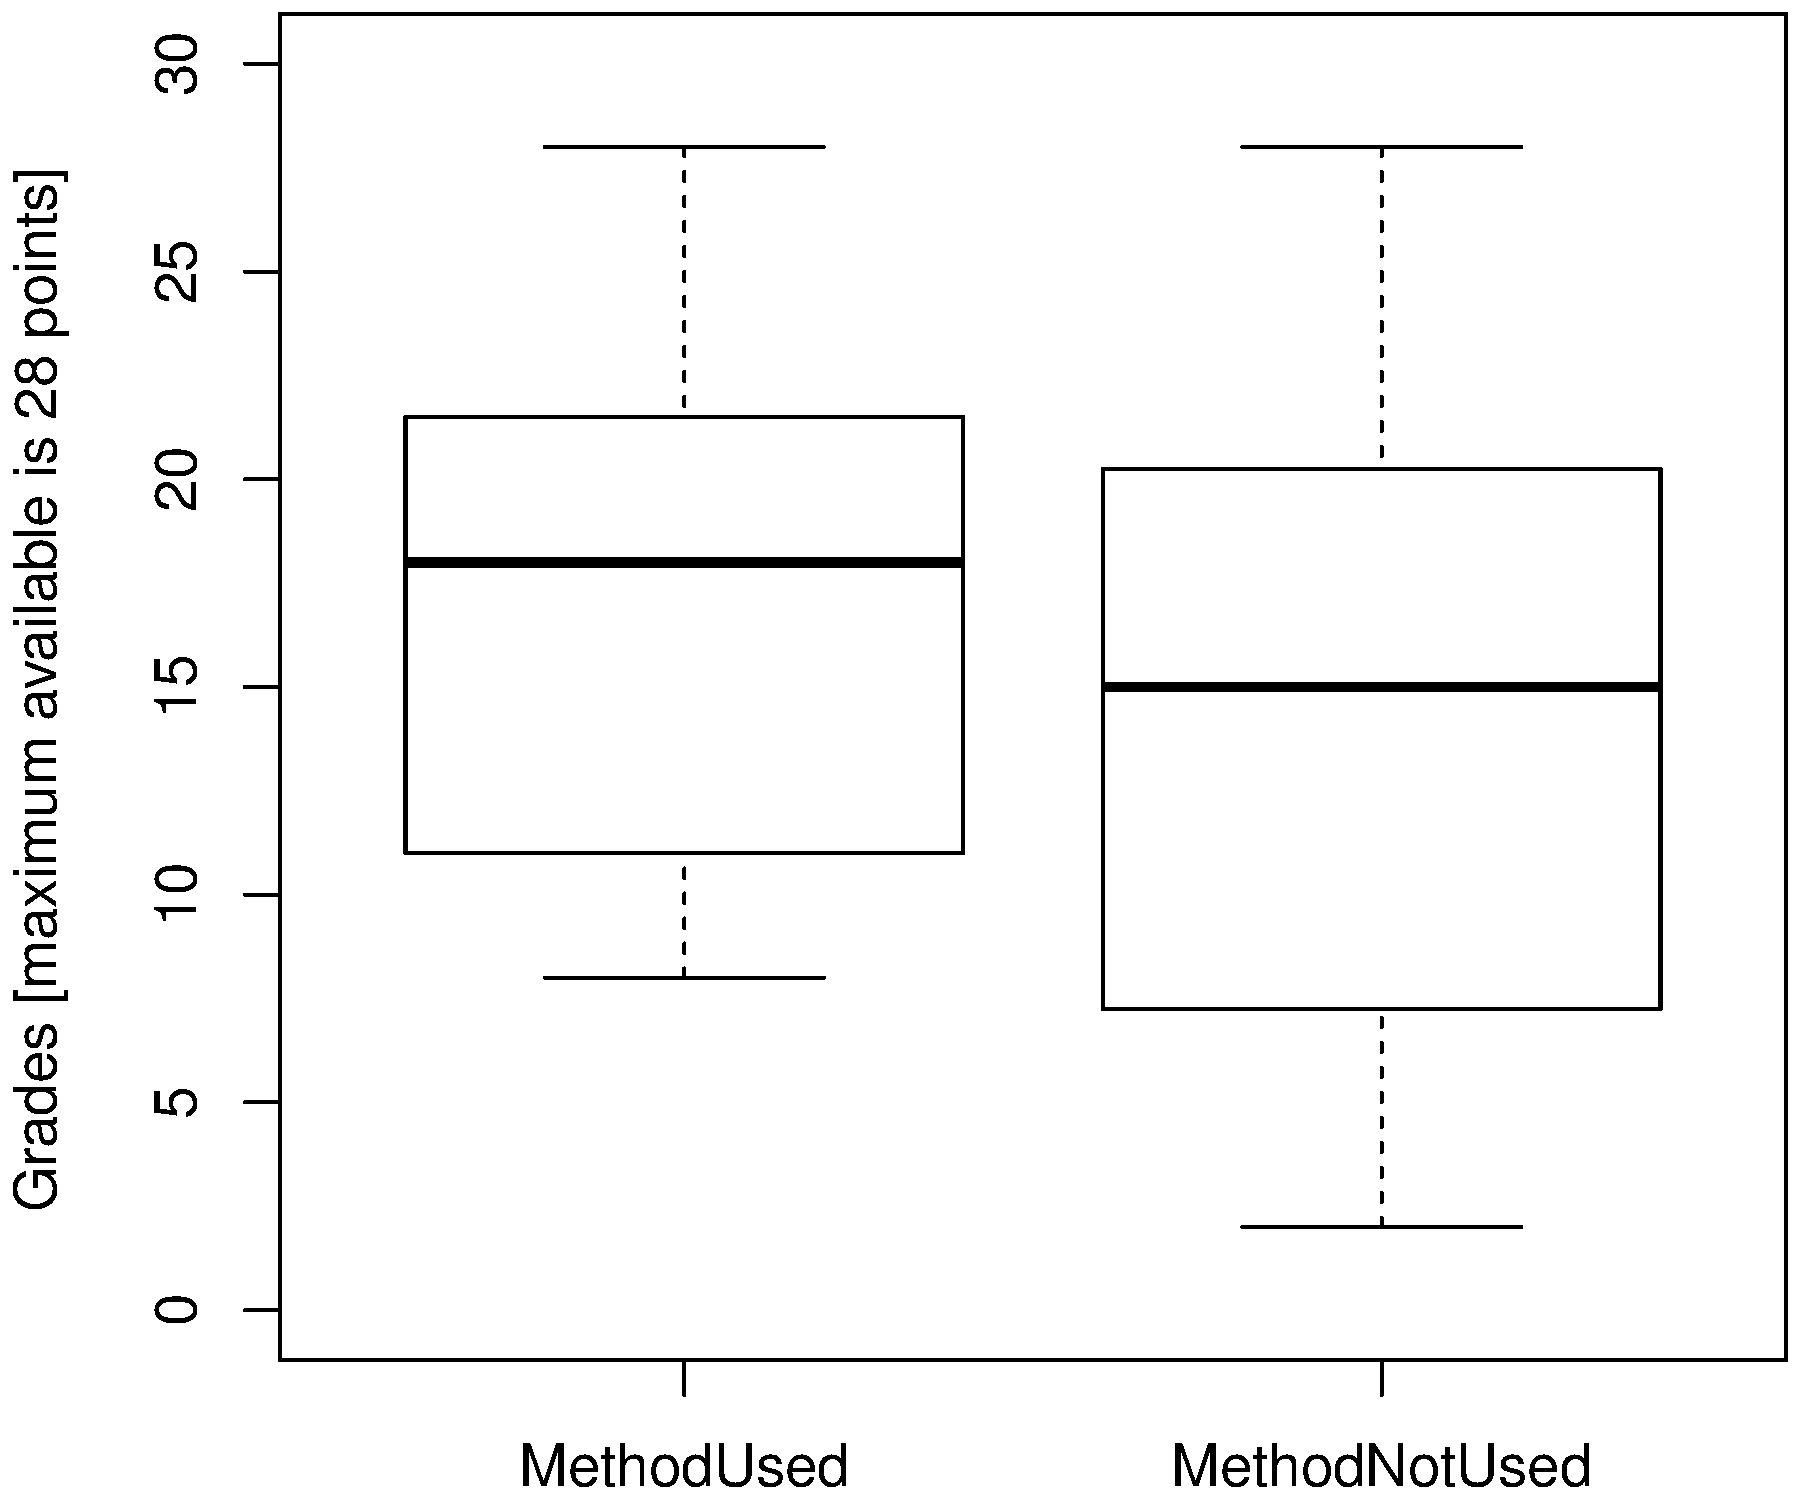 ../_images/boxplot-for-systematic-method-used-2014.png